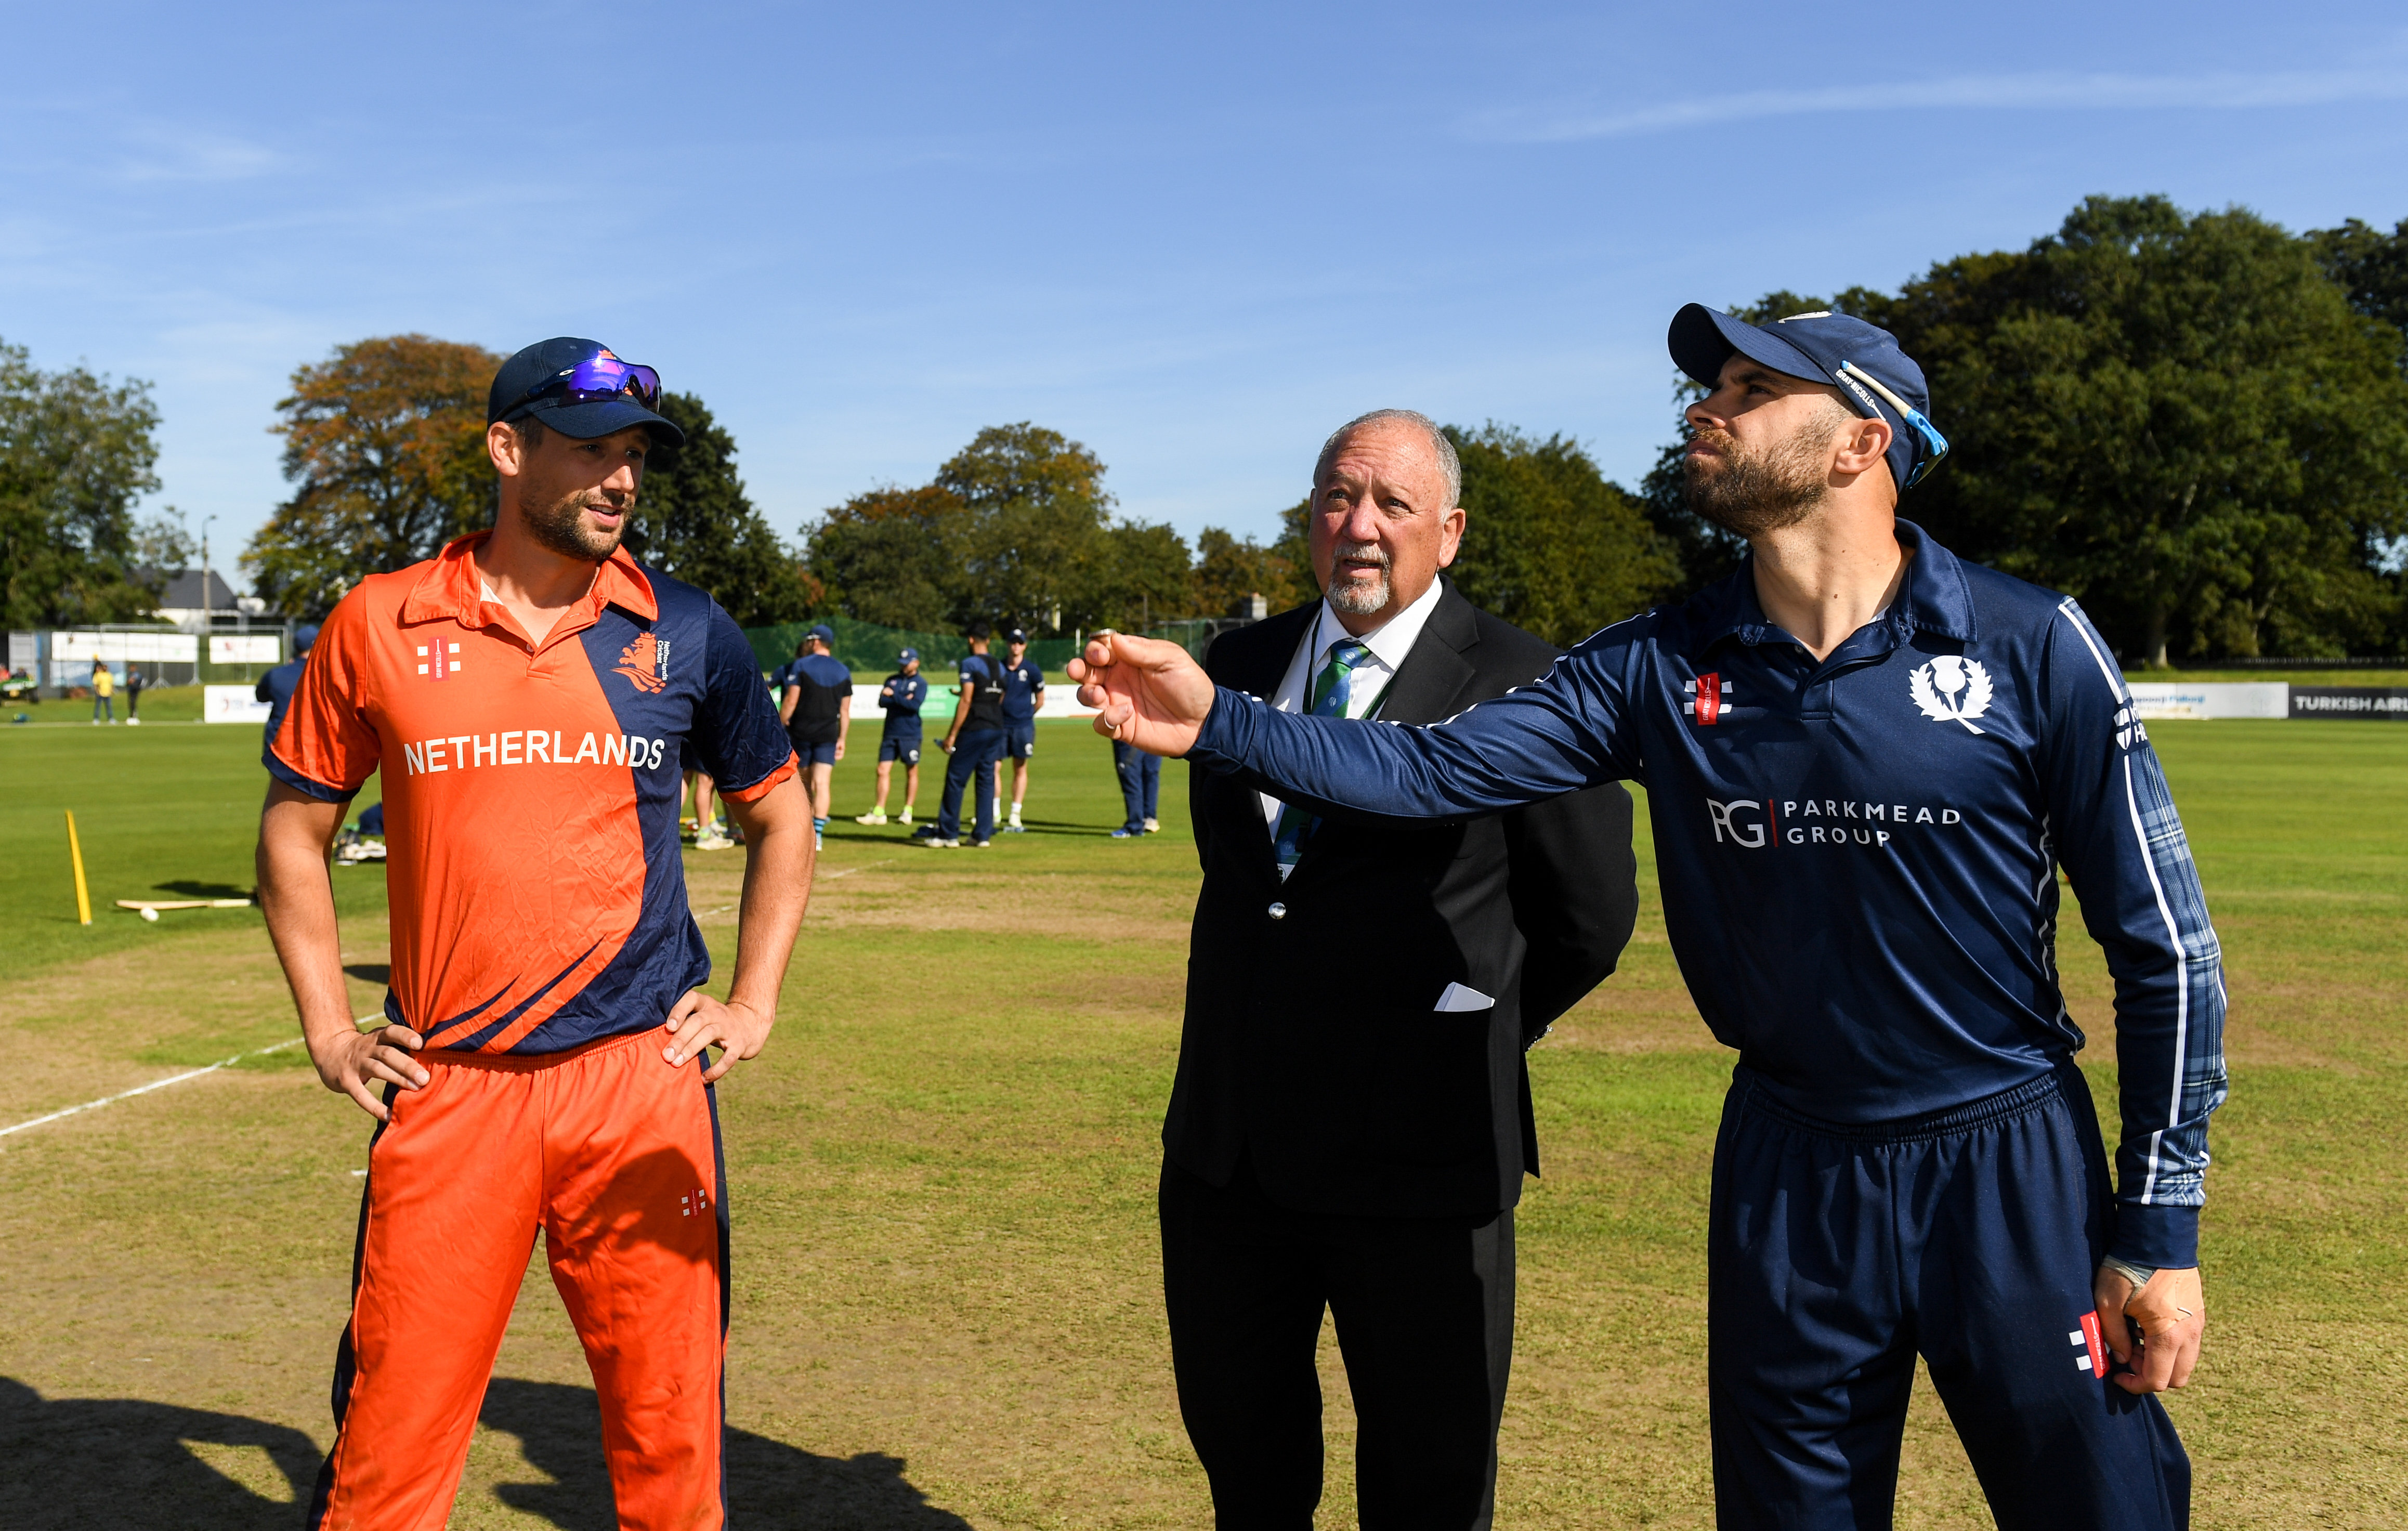 Kyle Coetzer of Scotland tosses the coin with Pieter Seelaar of Netherlands prior to the T20 International Tri Series match between Scotland and the Netherlands.